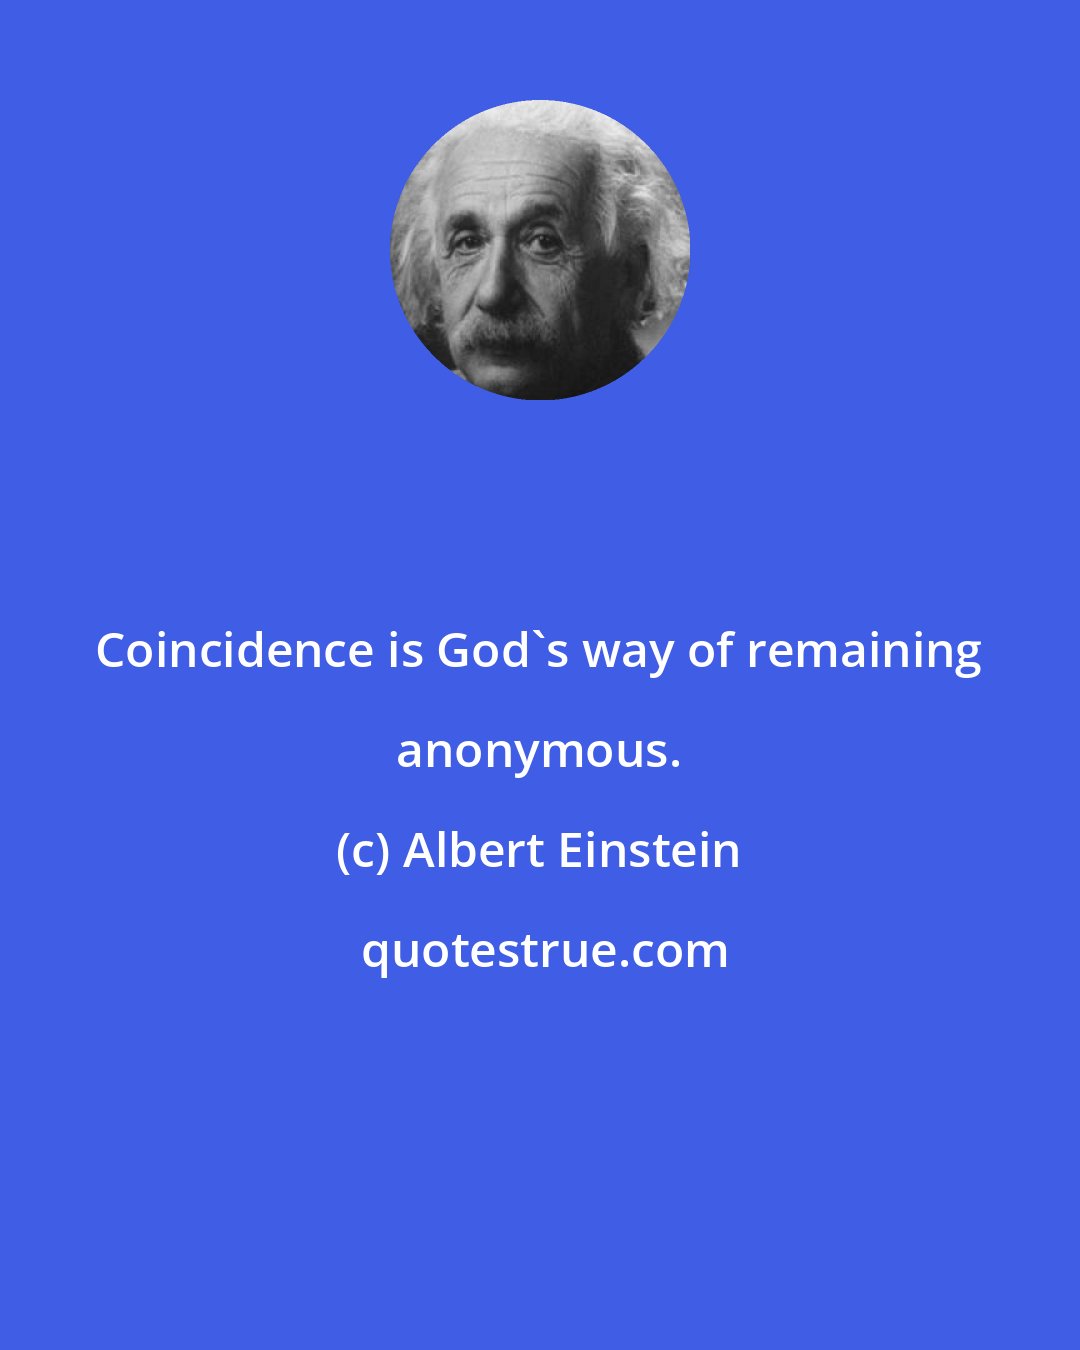 Albert Einstein: Coincidence is God's way of remaining anonymous.